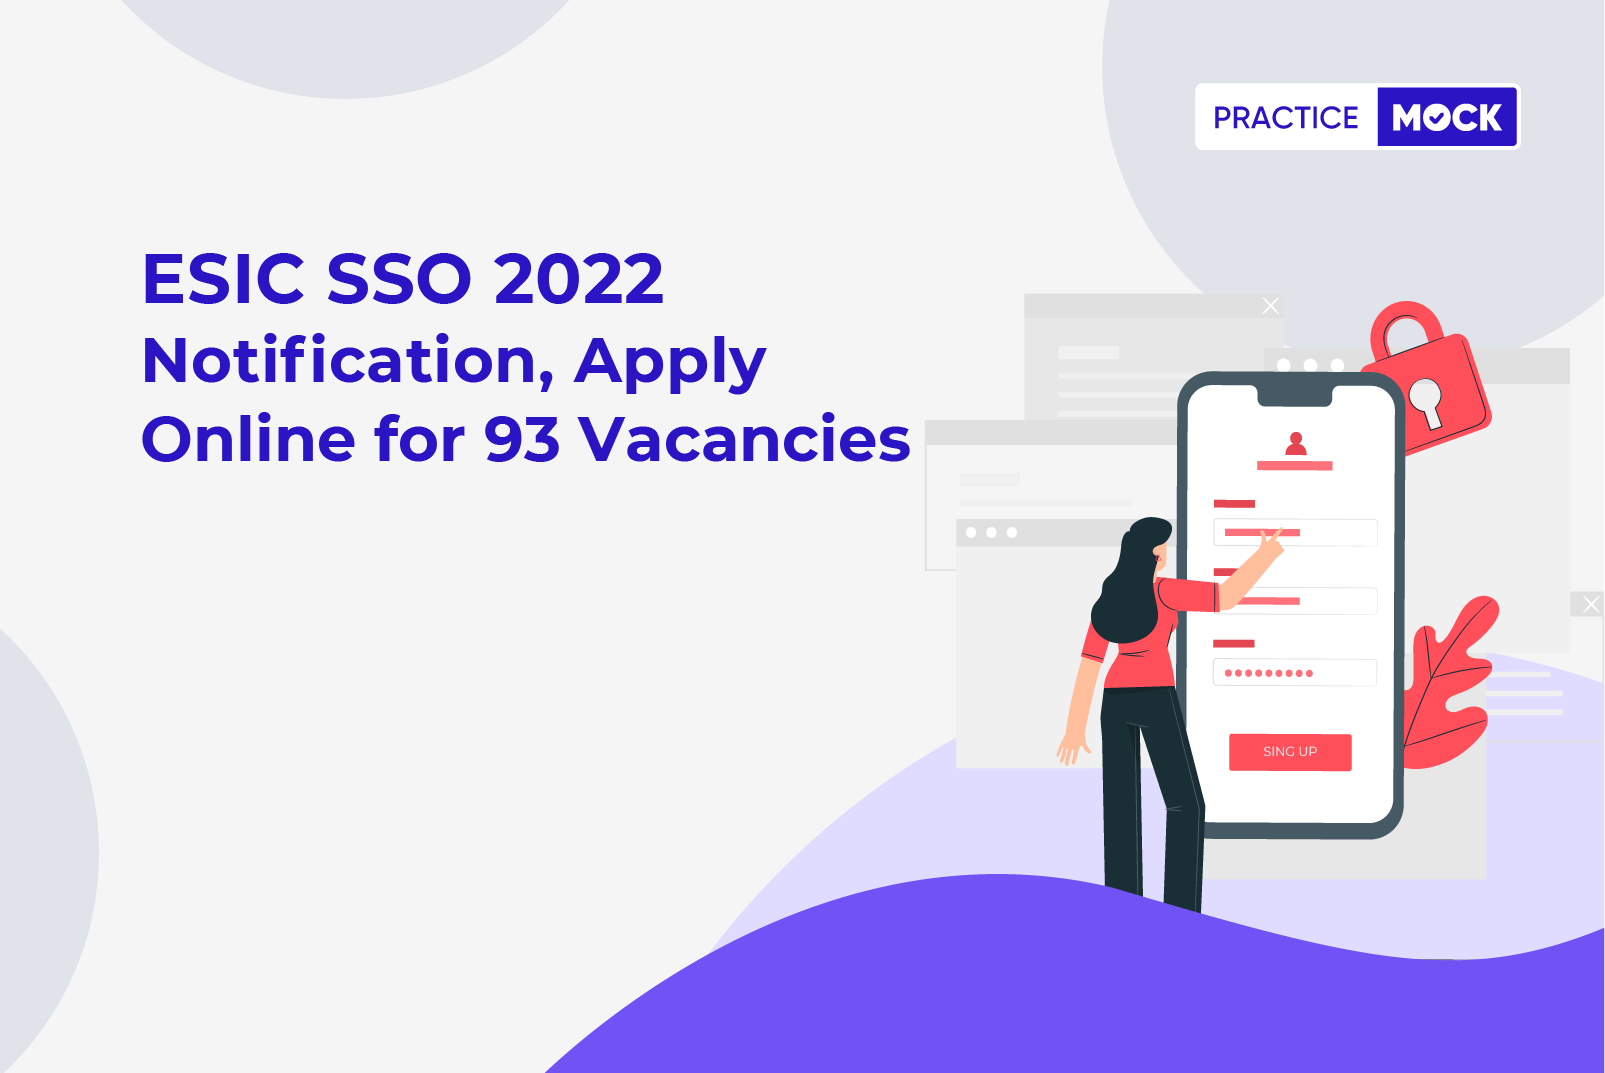 ESIC SSO 2022 Notification, Apply Online for 93 Vacancies